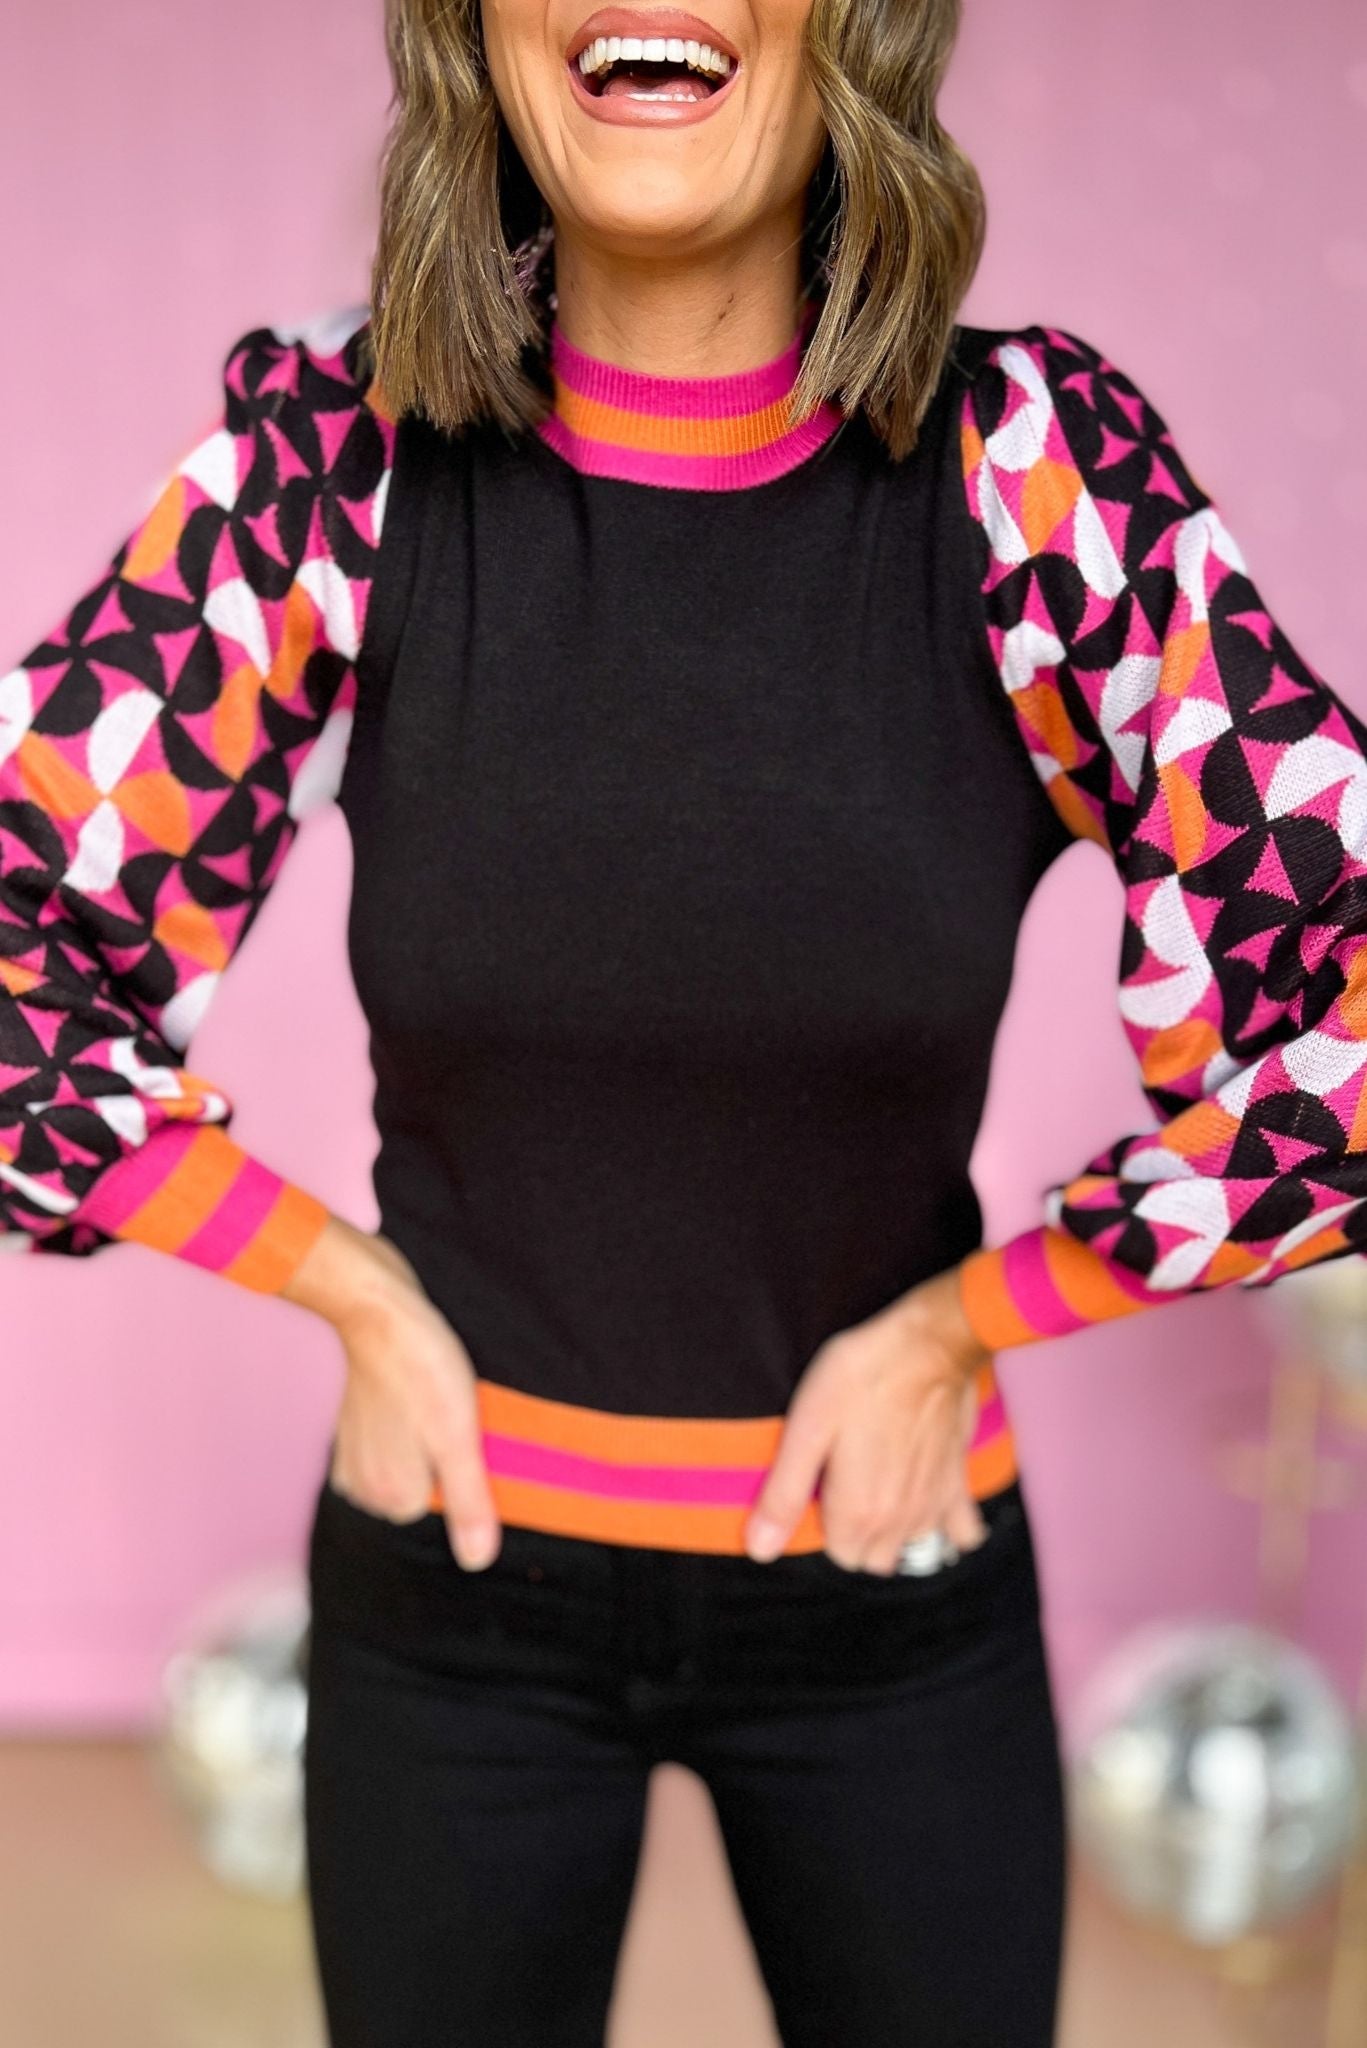 Black Hot Pink Contrast Print Sleeve Sweater, fall fashion, layered look, must have, mom style, elevated look, shop style your senses by mallory fitzsimmons